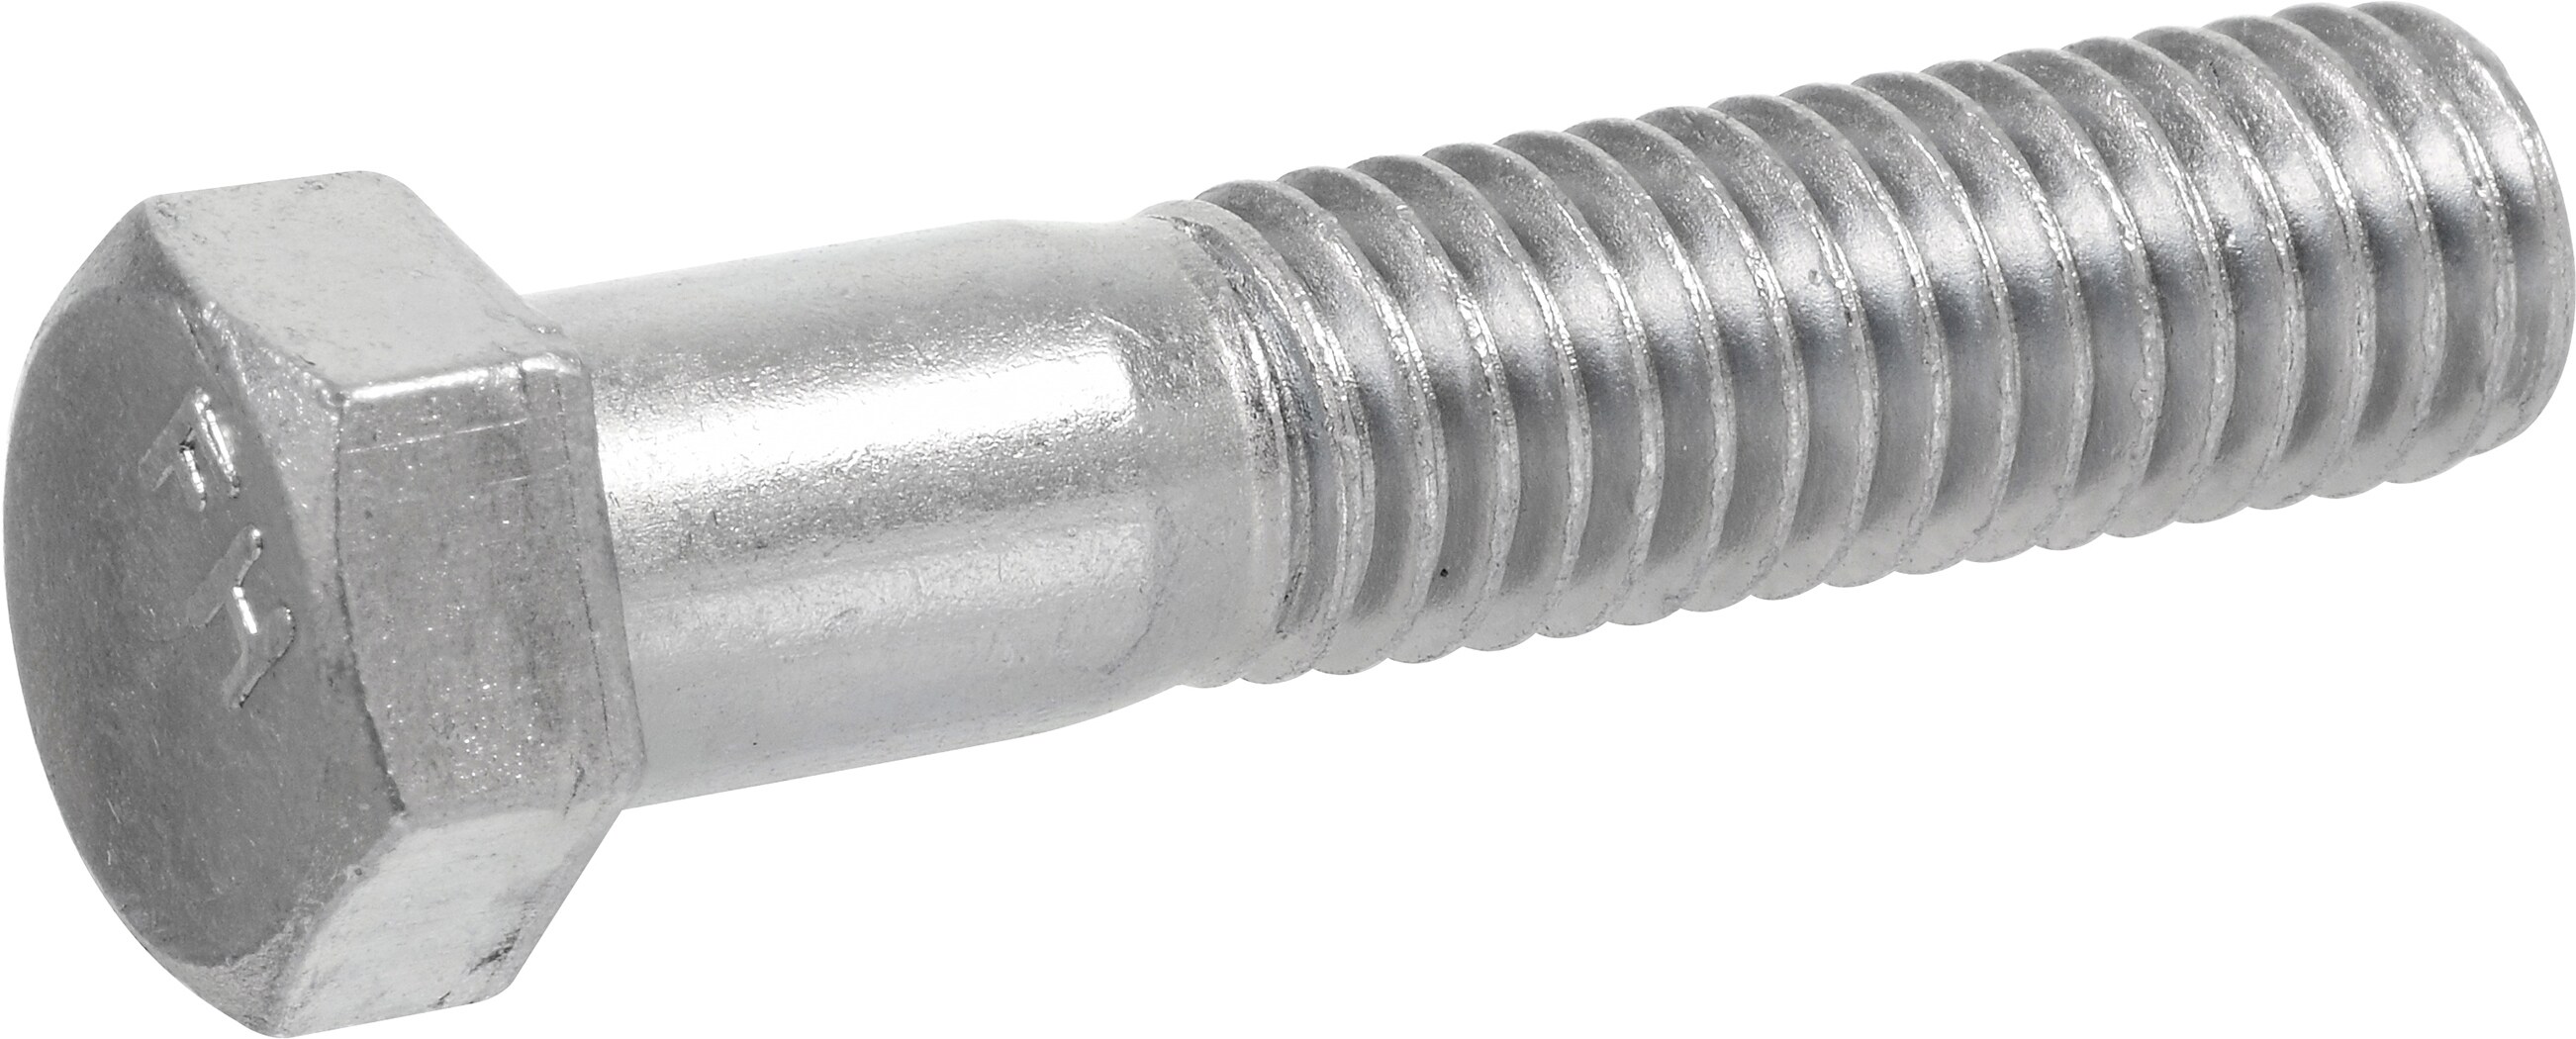 Qty 100 5/16in x 3 1/2in Hex Bolts w/ Nuts Zinc Plated Grade 8 Partial Thread 